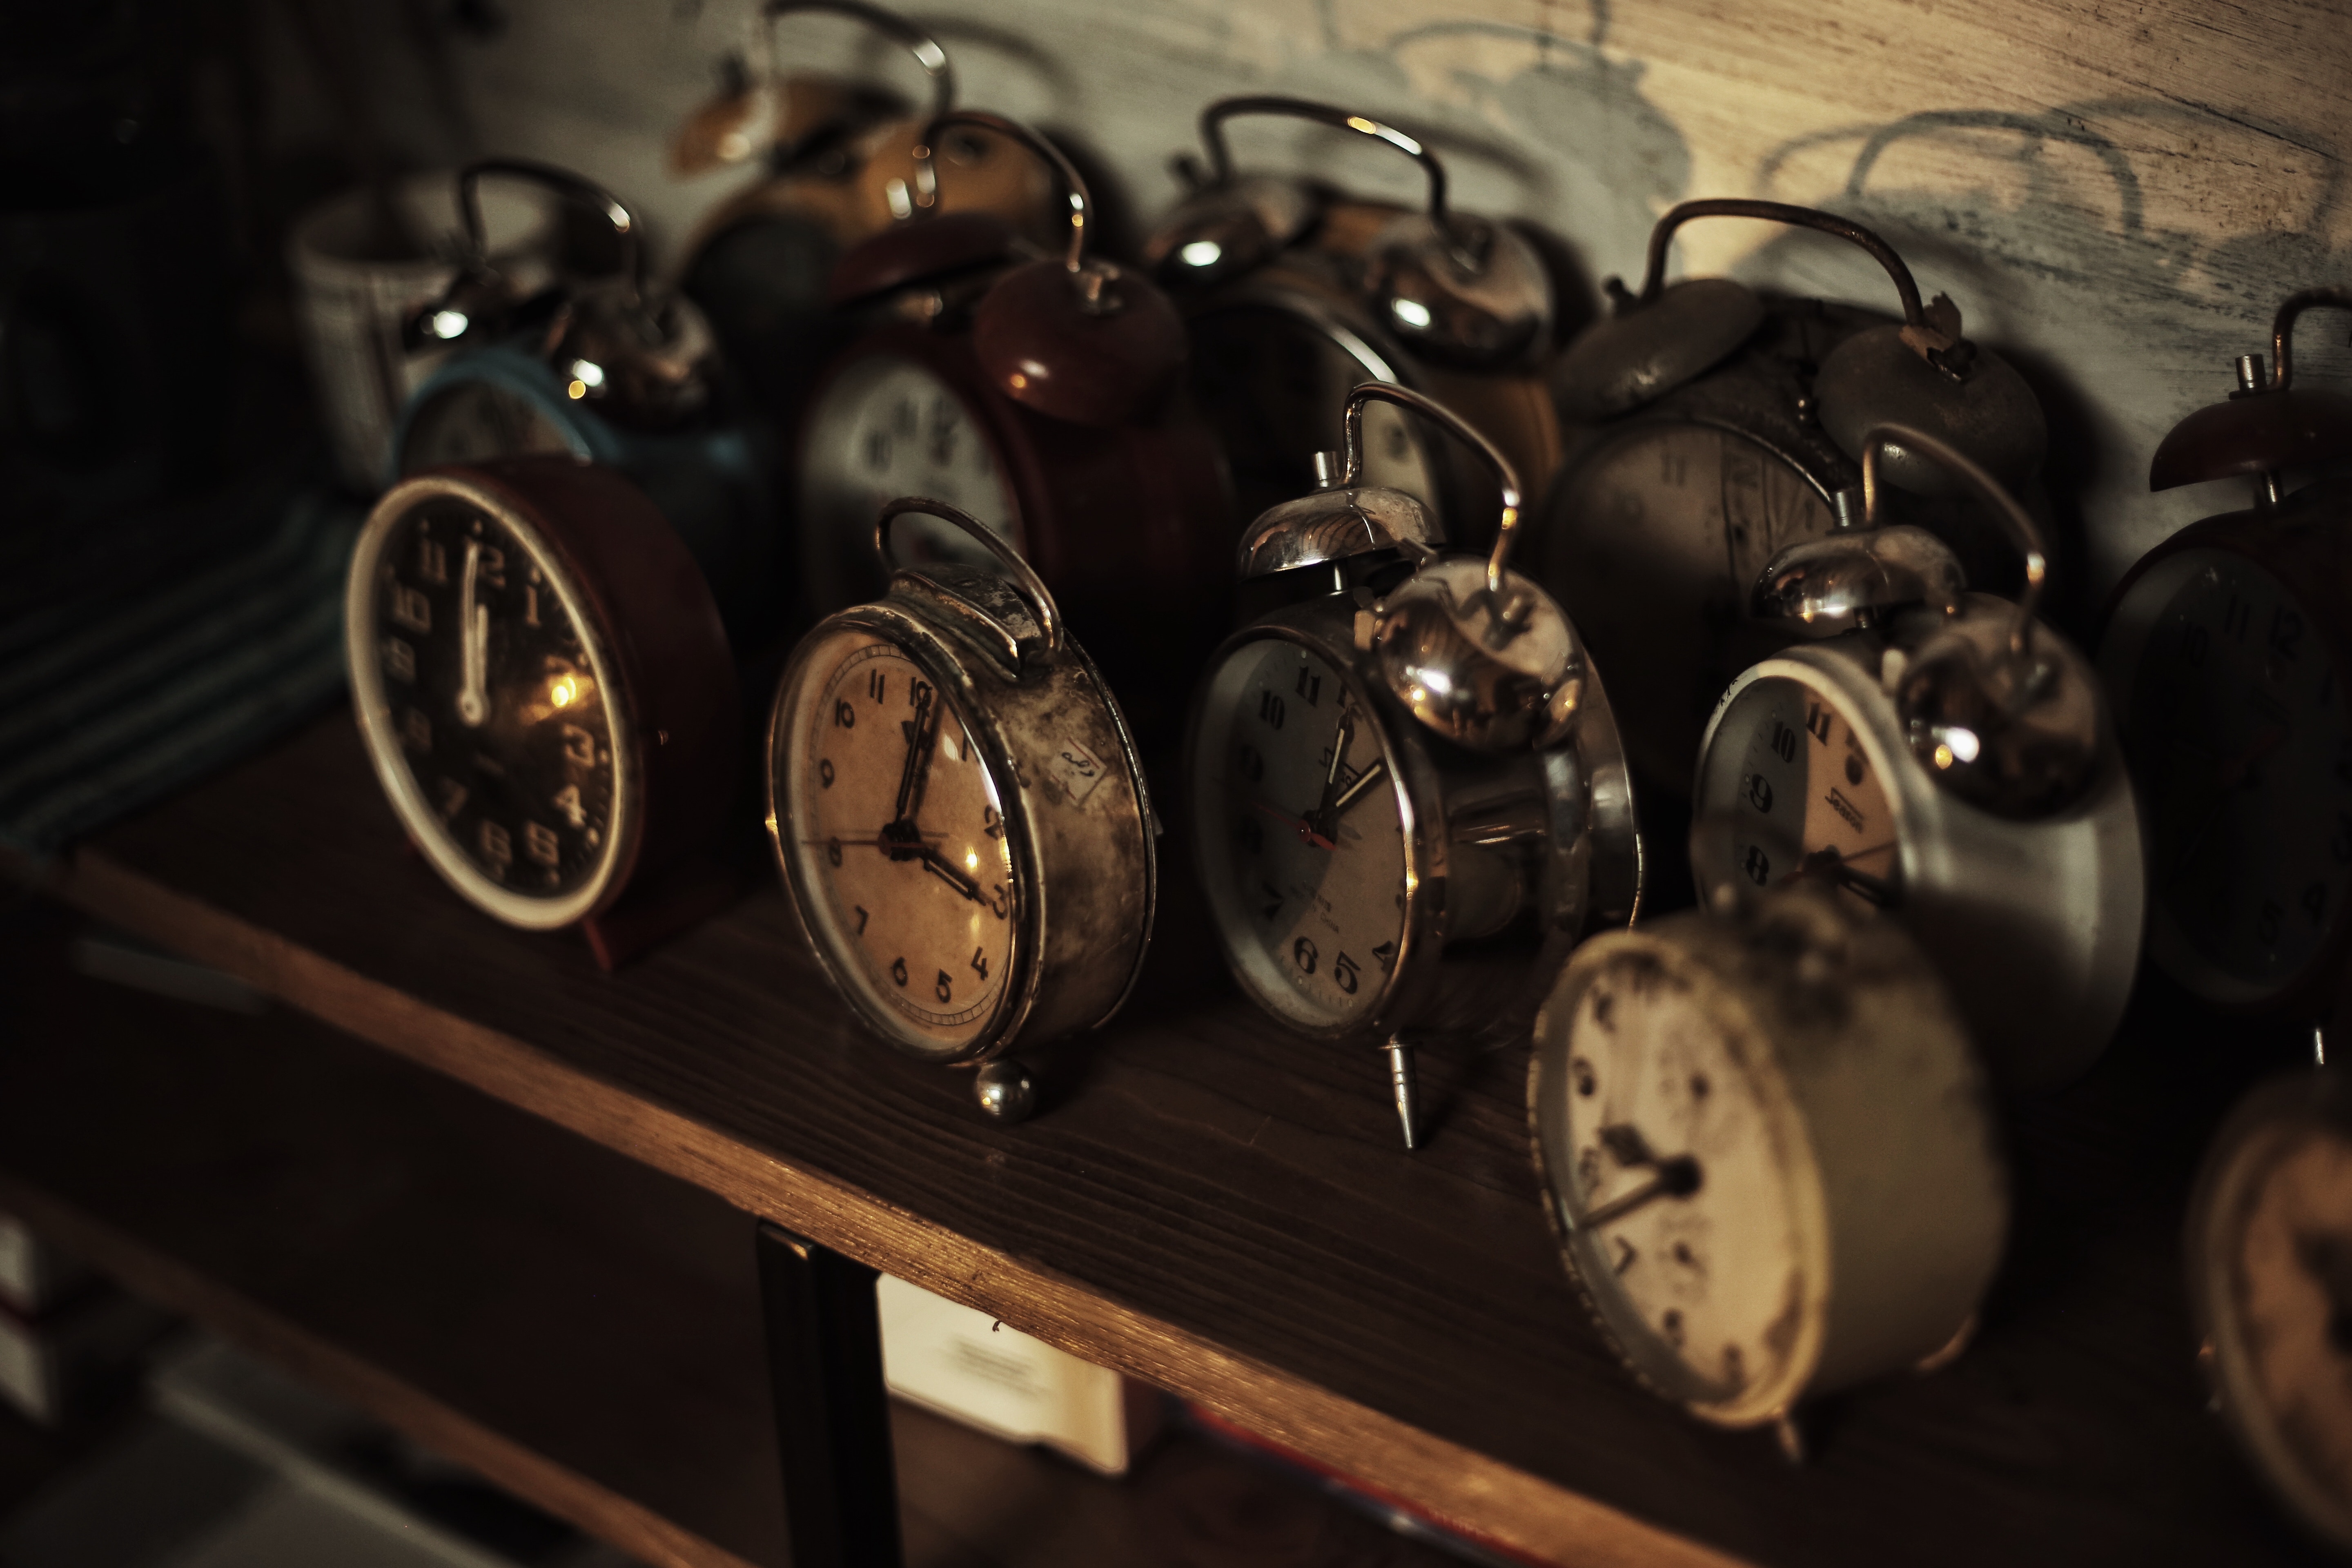 A row of old-fashioned alarm clocks showing how it's hard to break what you're used to 